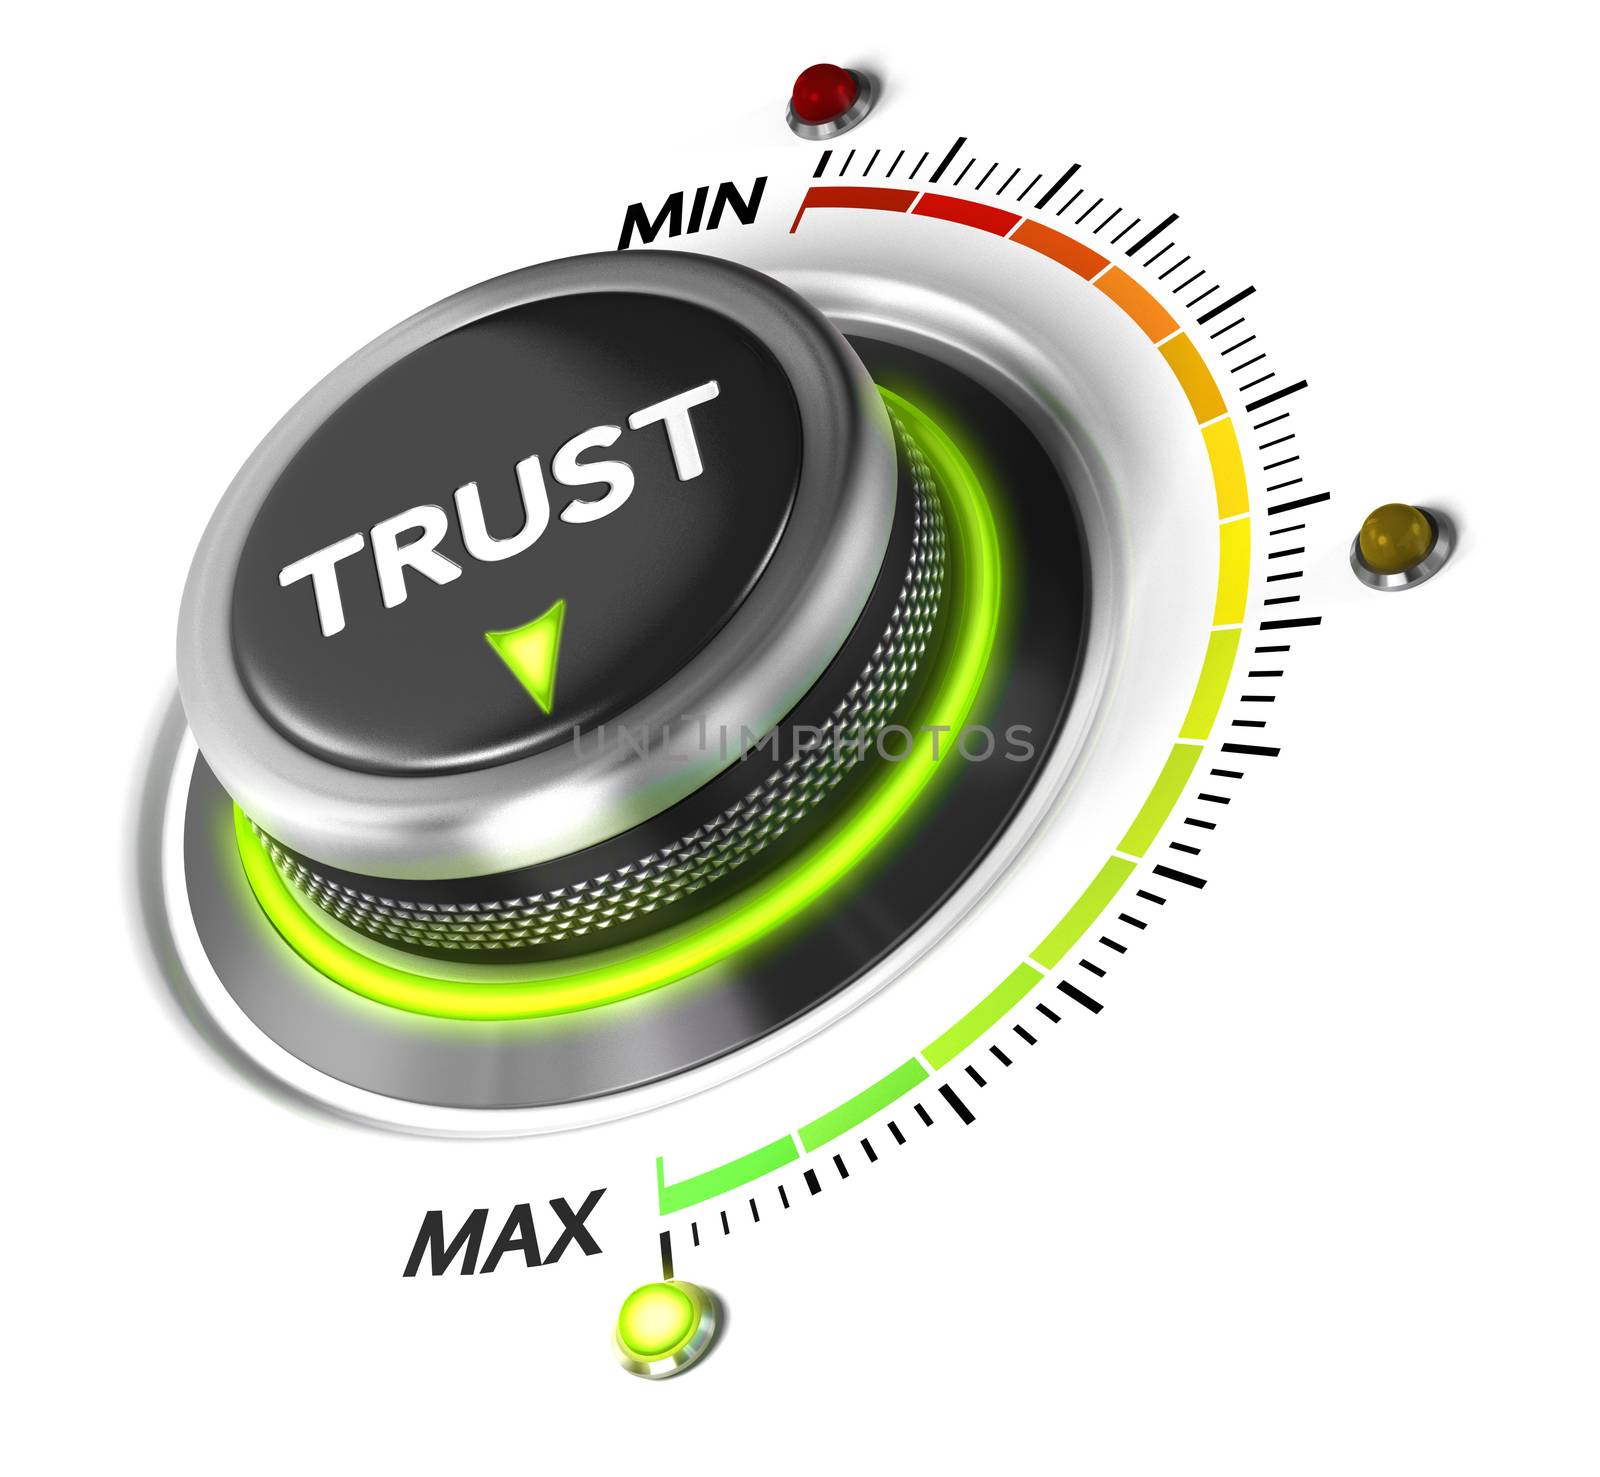 Trust button set on highest position. Concept image for illustration of high confidence level, trusted service or review.